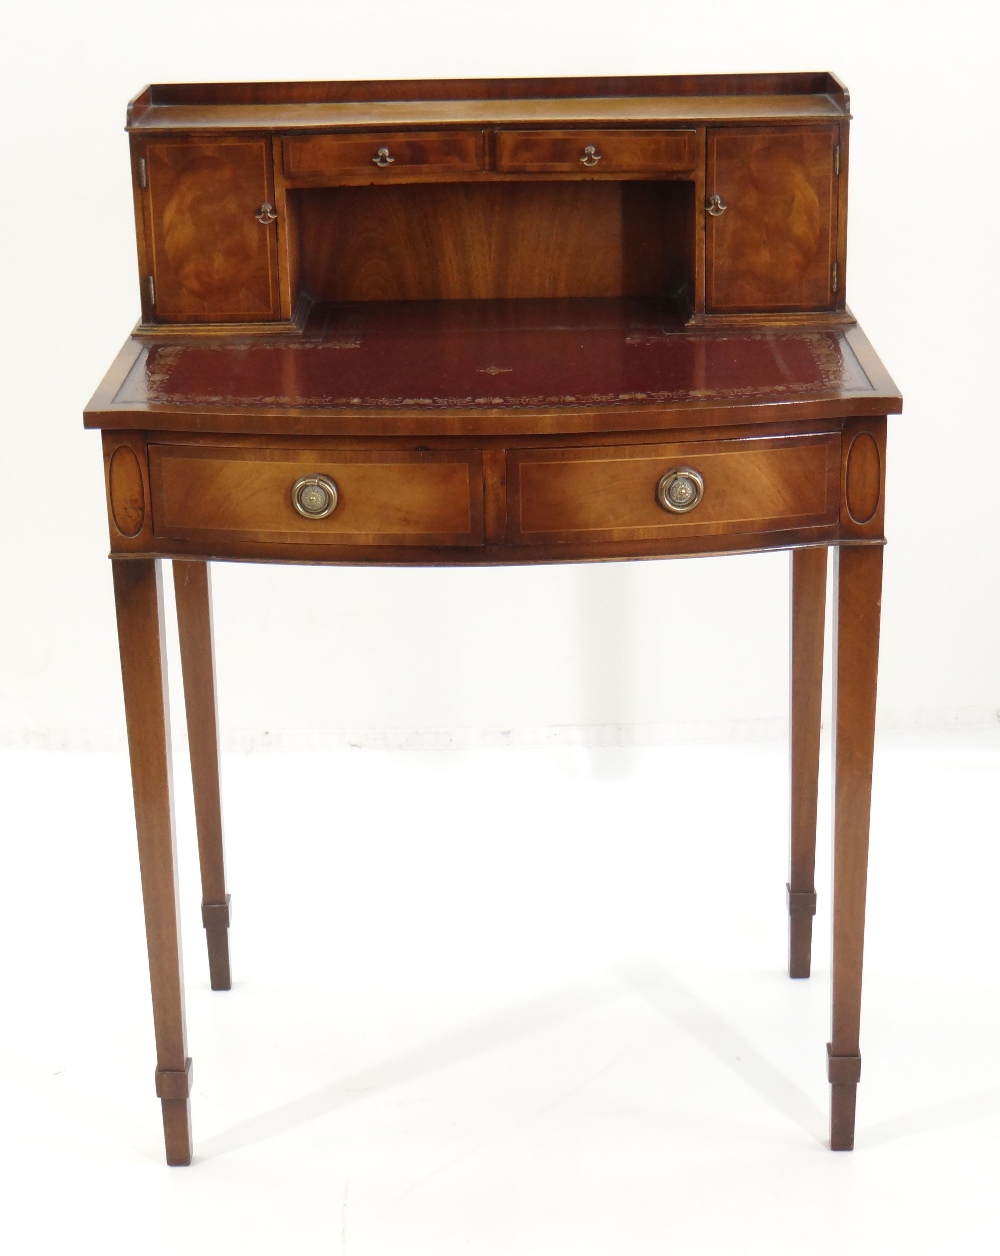 GEORGE III-STYLE MAHOGANY BONHEUR DU JOUR, stationary cupboards, and frieze drawers, inset tooled